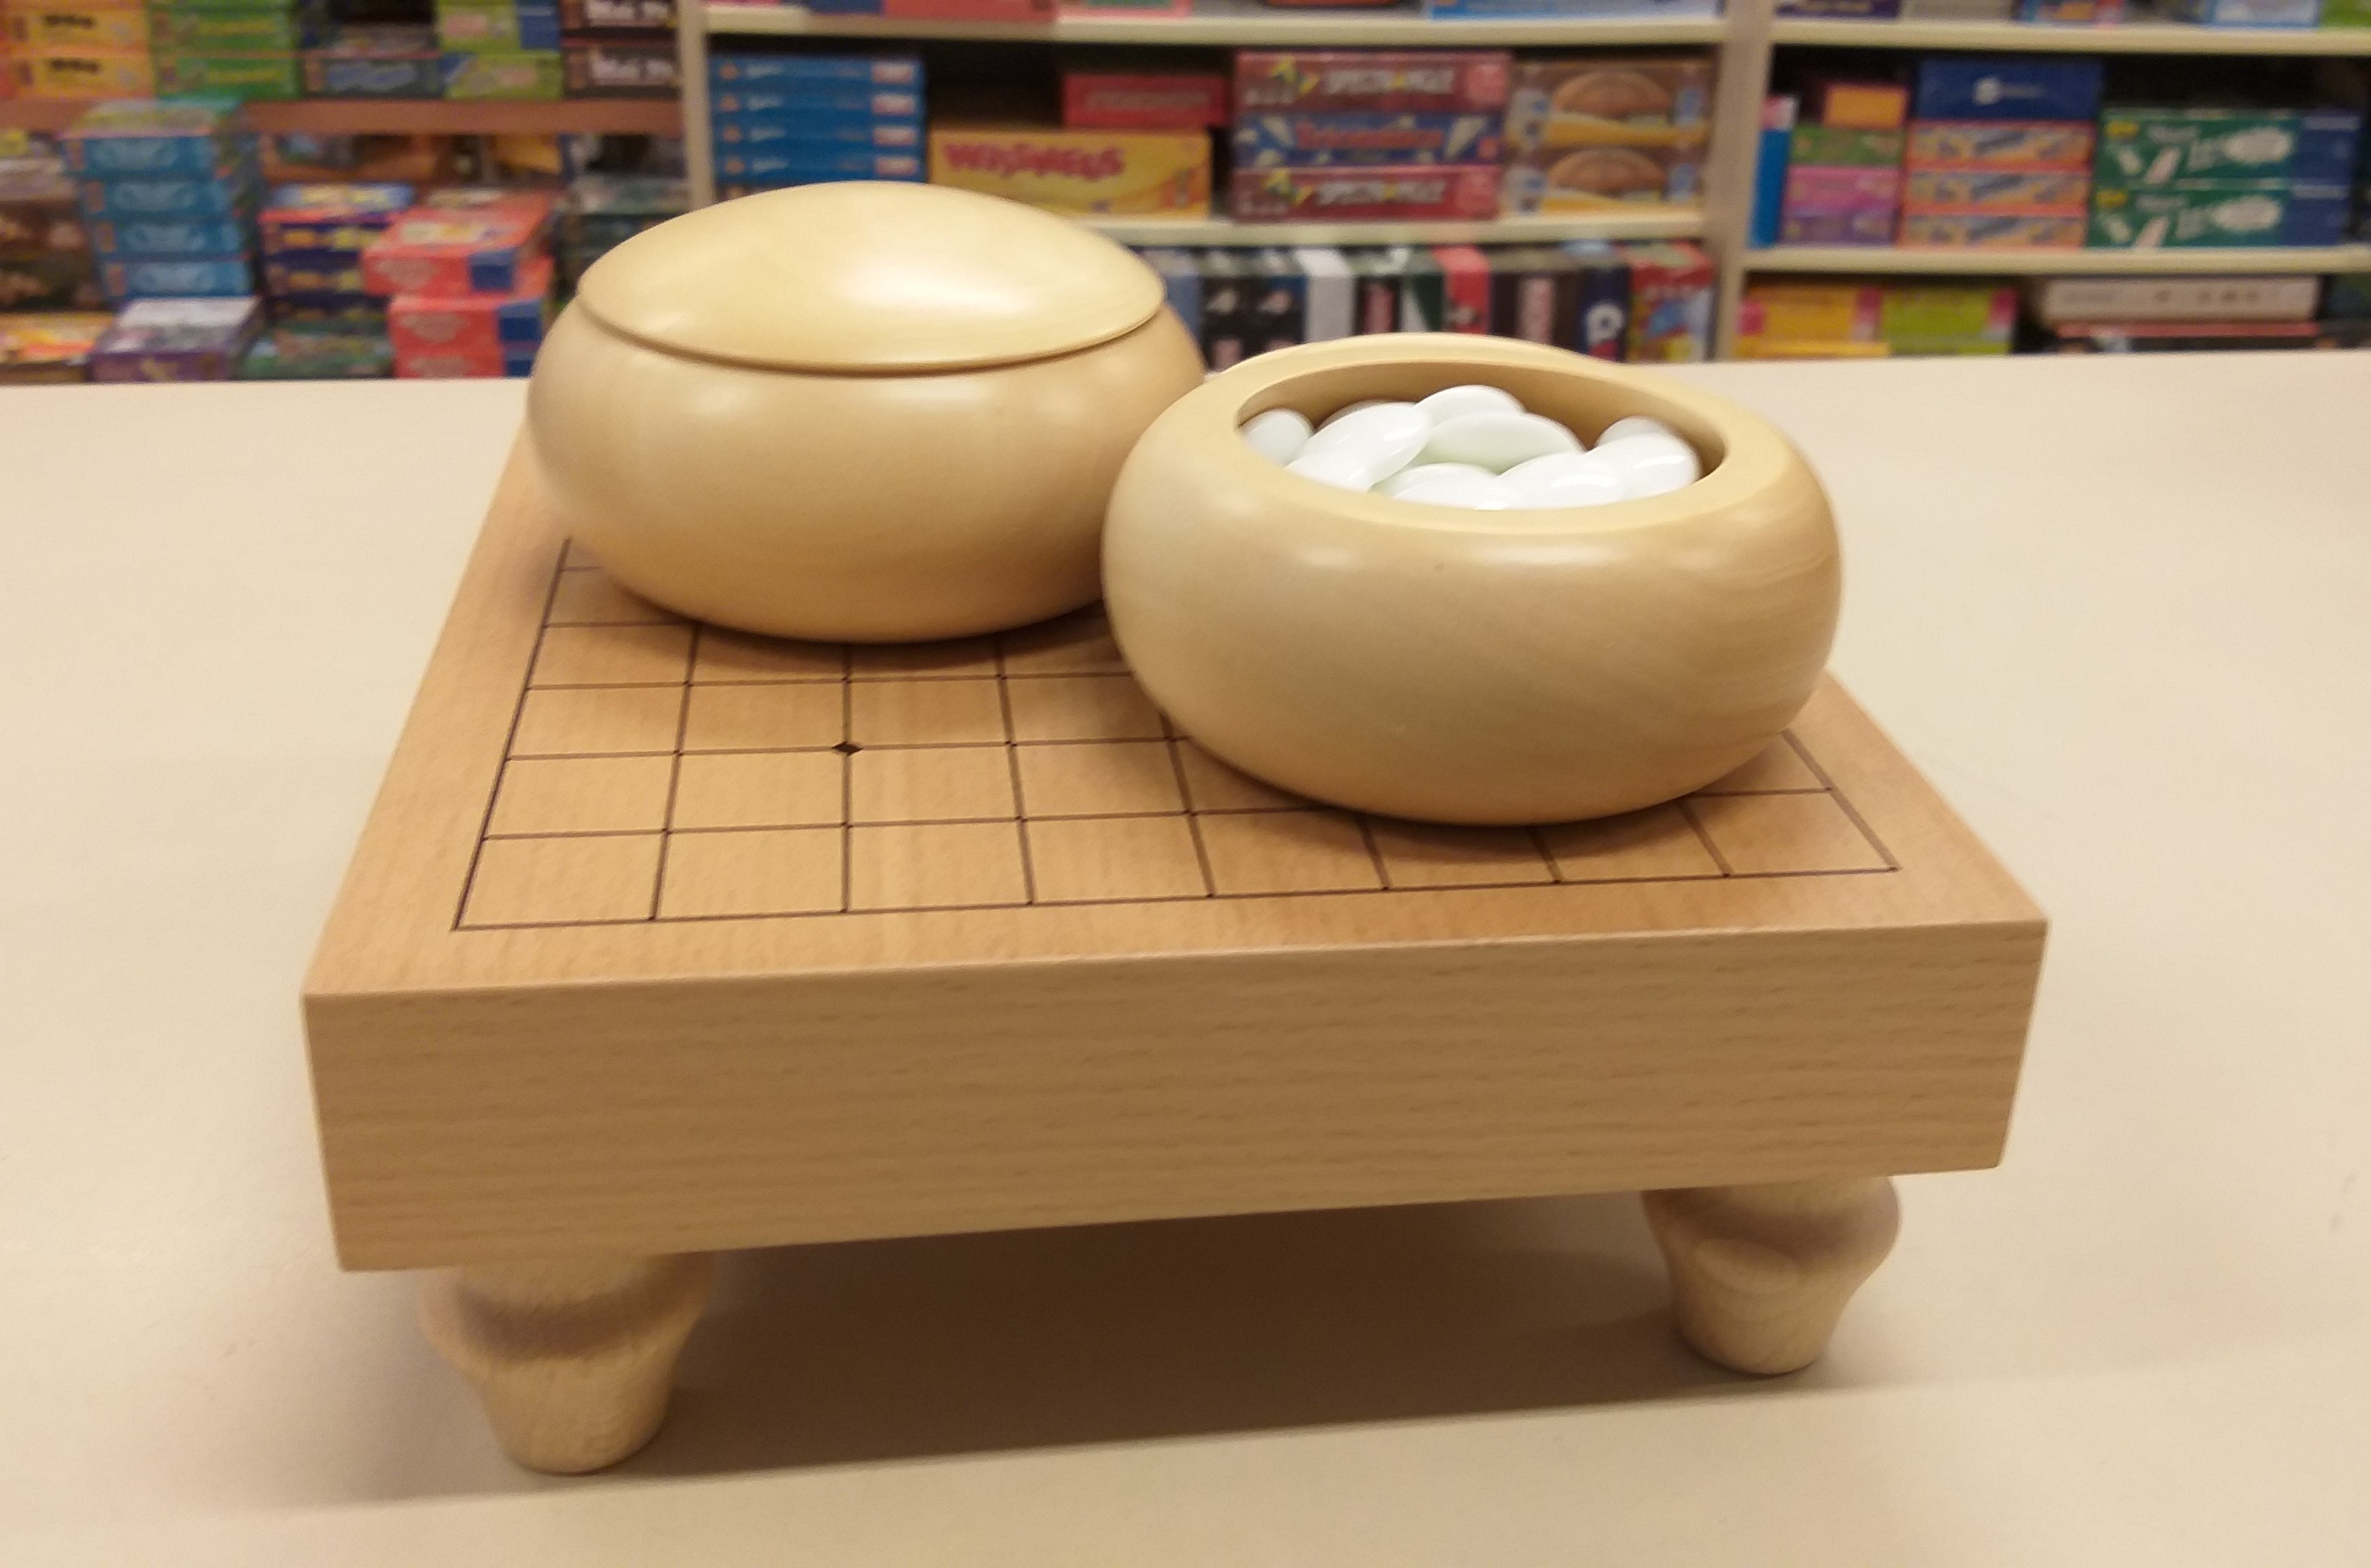 Goban 9x9 with light bowls